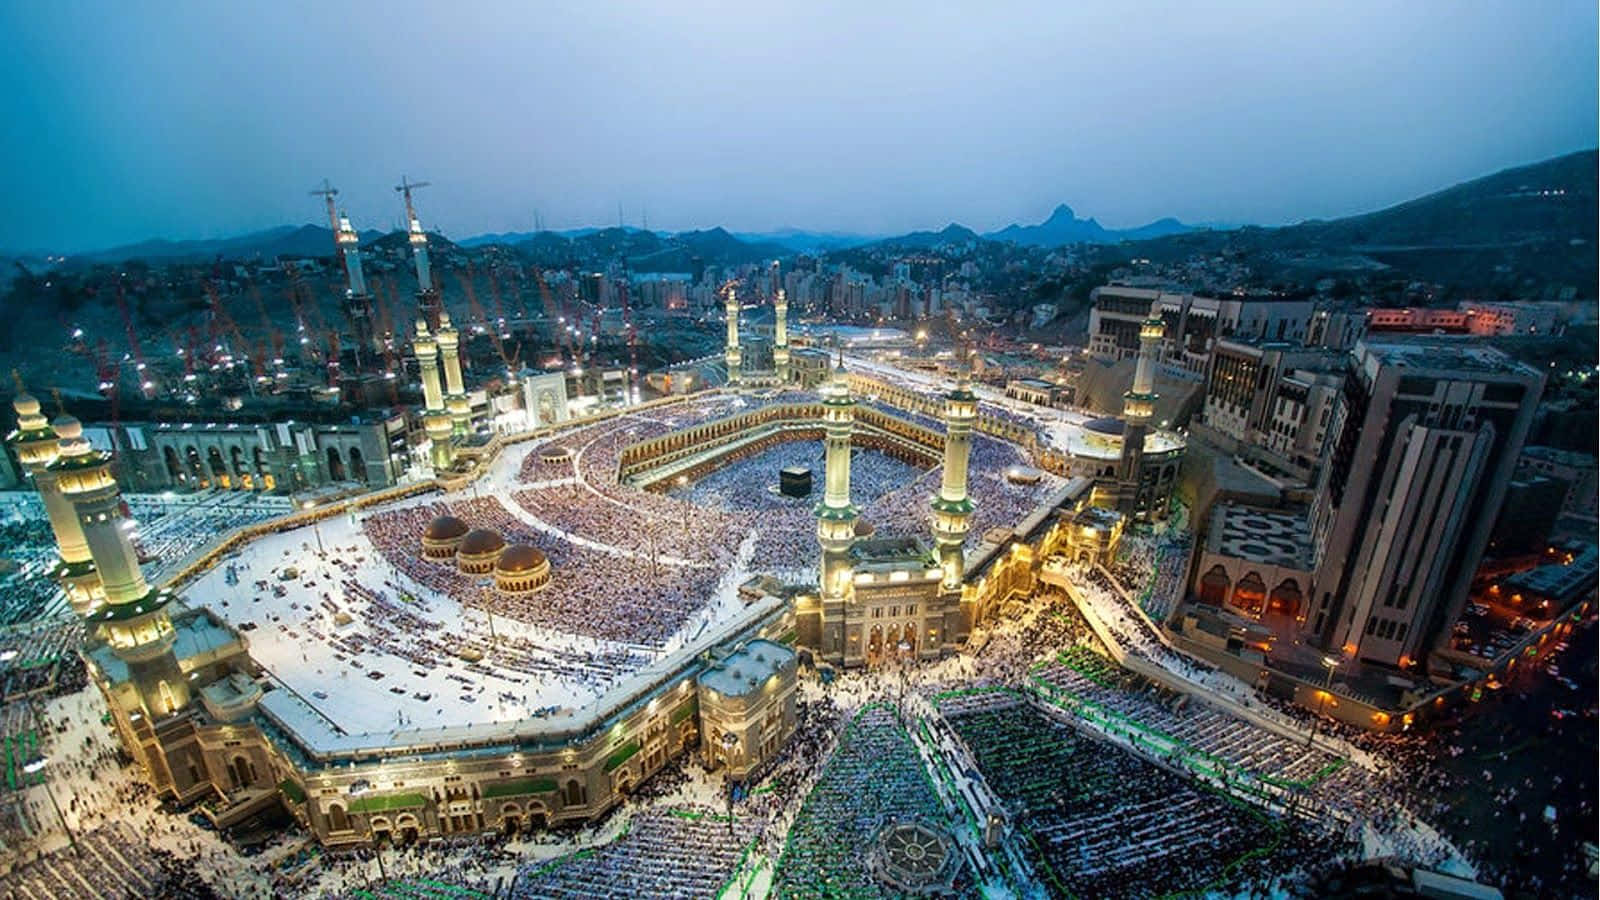 A majestic view of Makkah from the sky